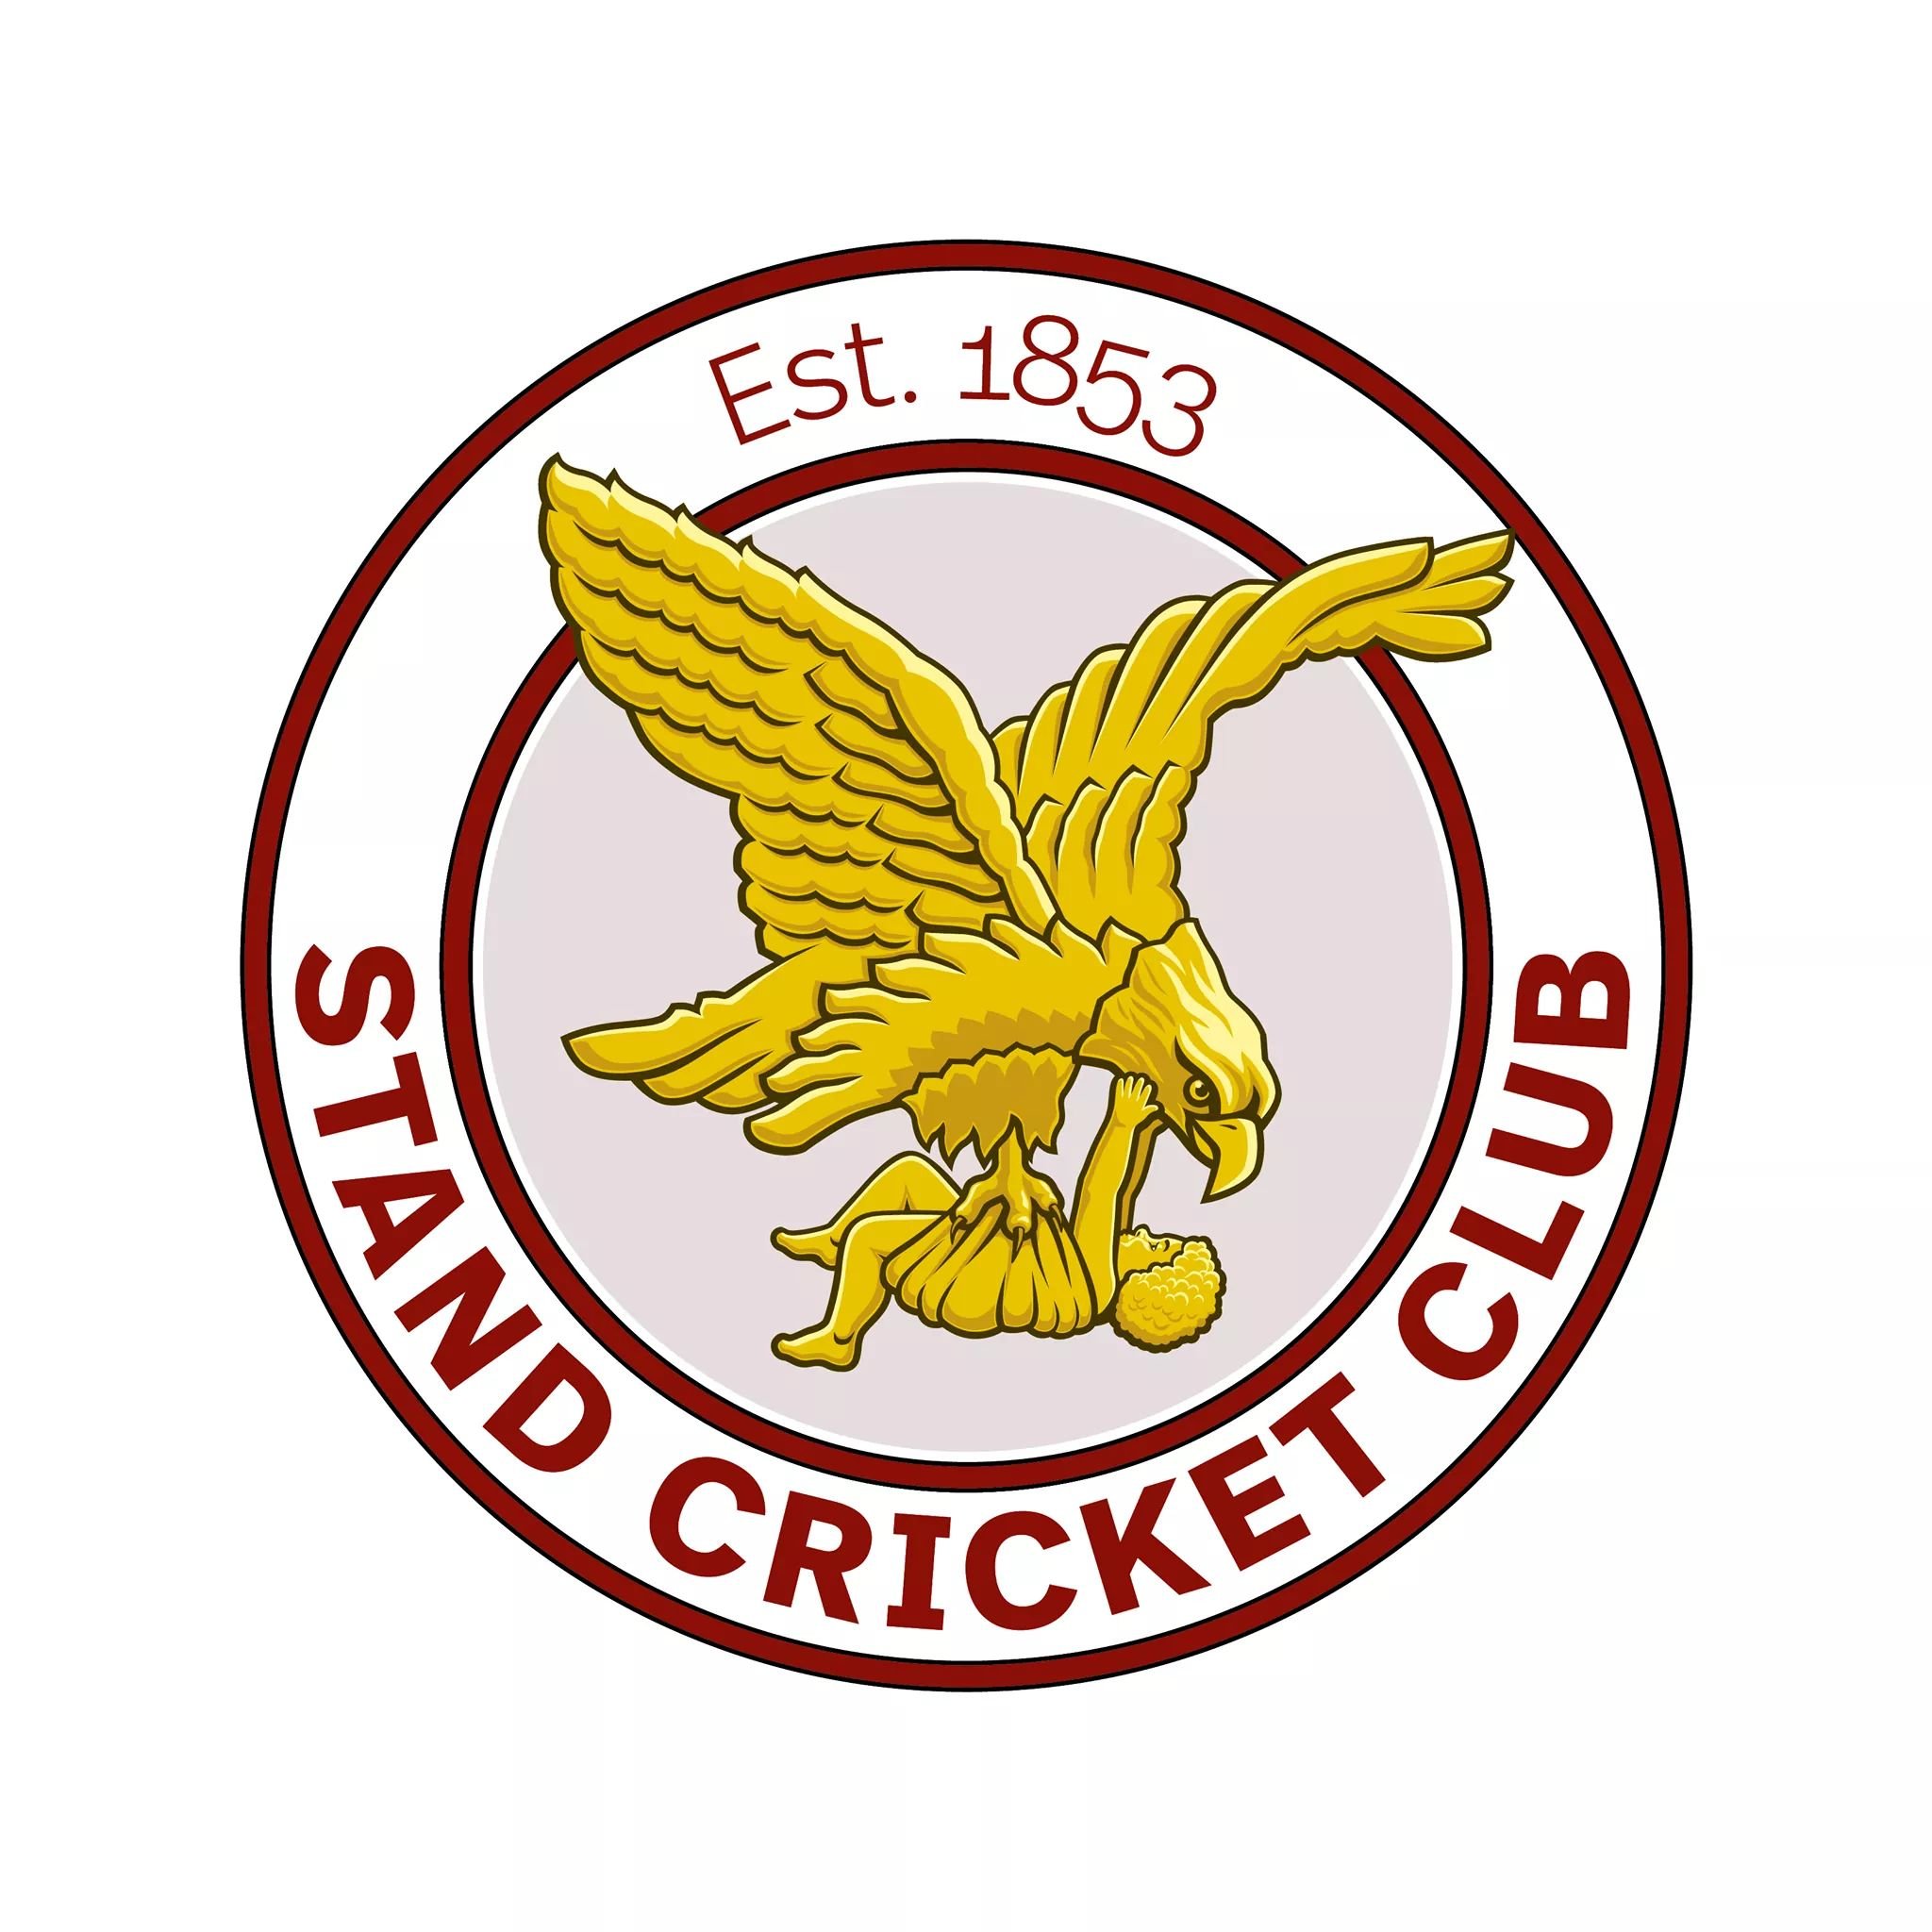 Founder member of the GMCL. ECB Clubmark Accredited. Available for functions, contact: T: 01617666793 E: enquiries@standcc.co.uk.